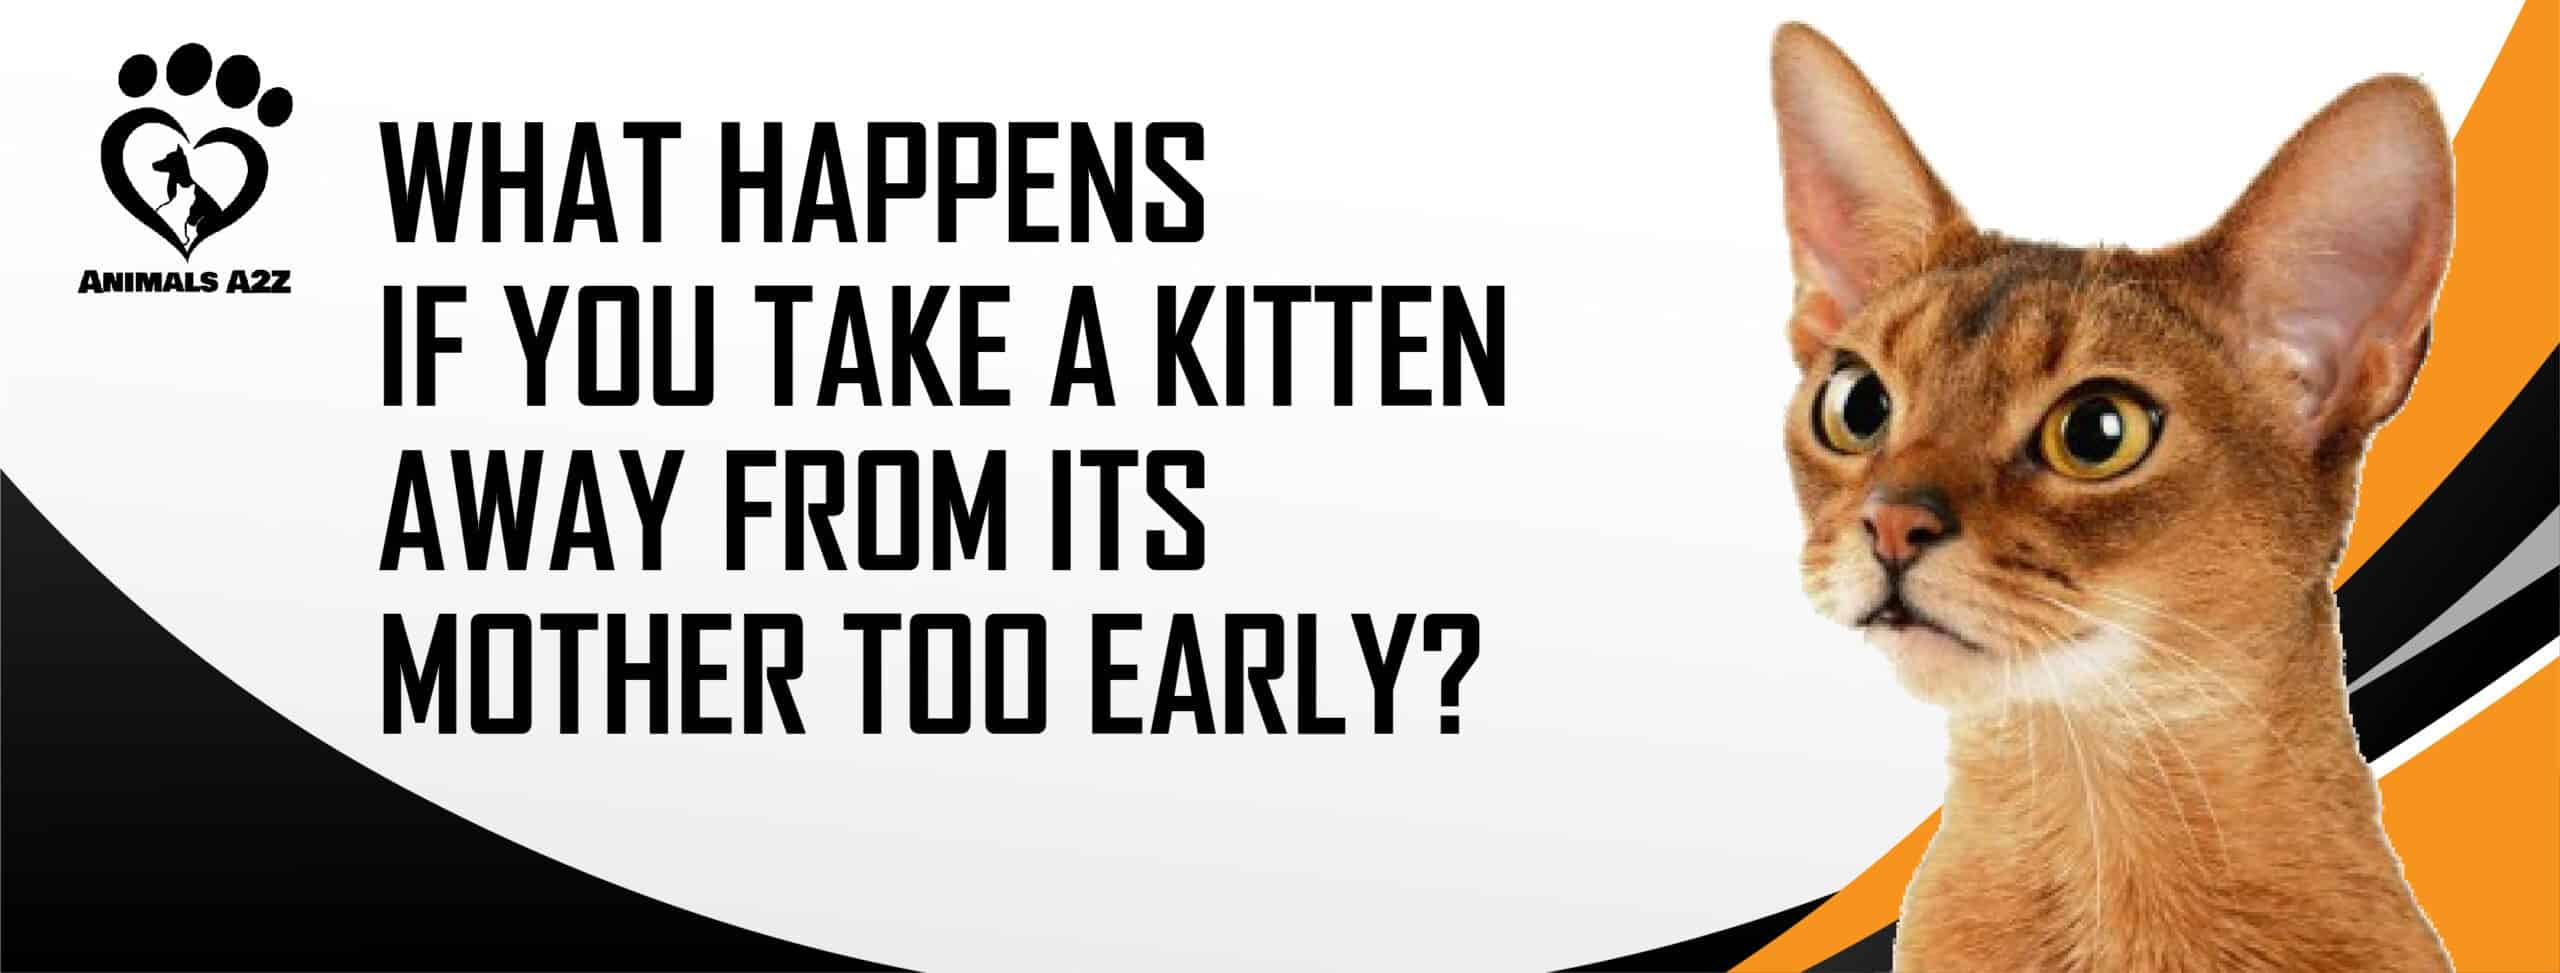 What happens if you take a kitten away from its mother too early